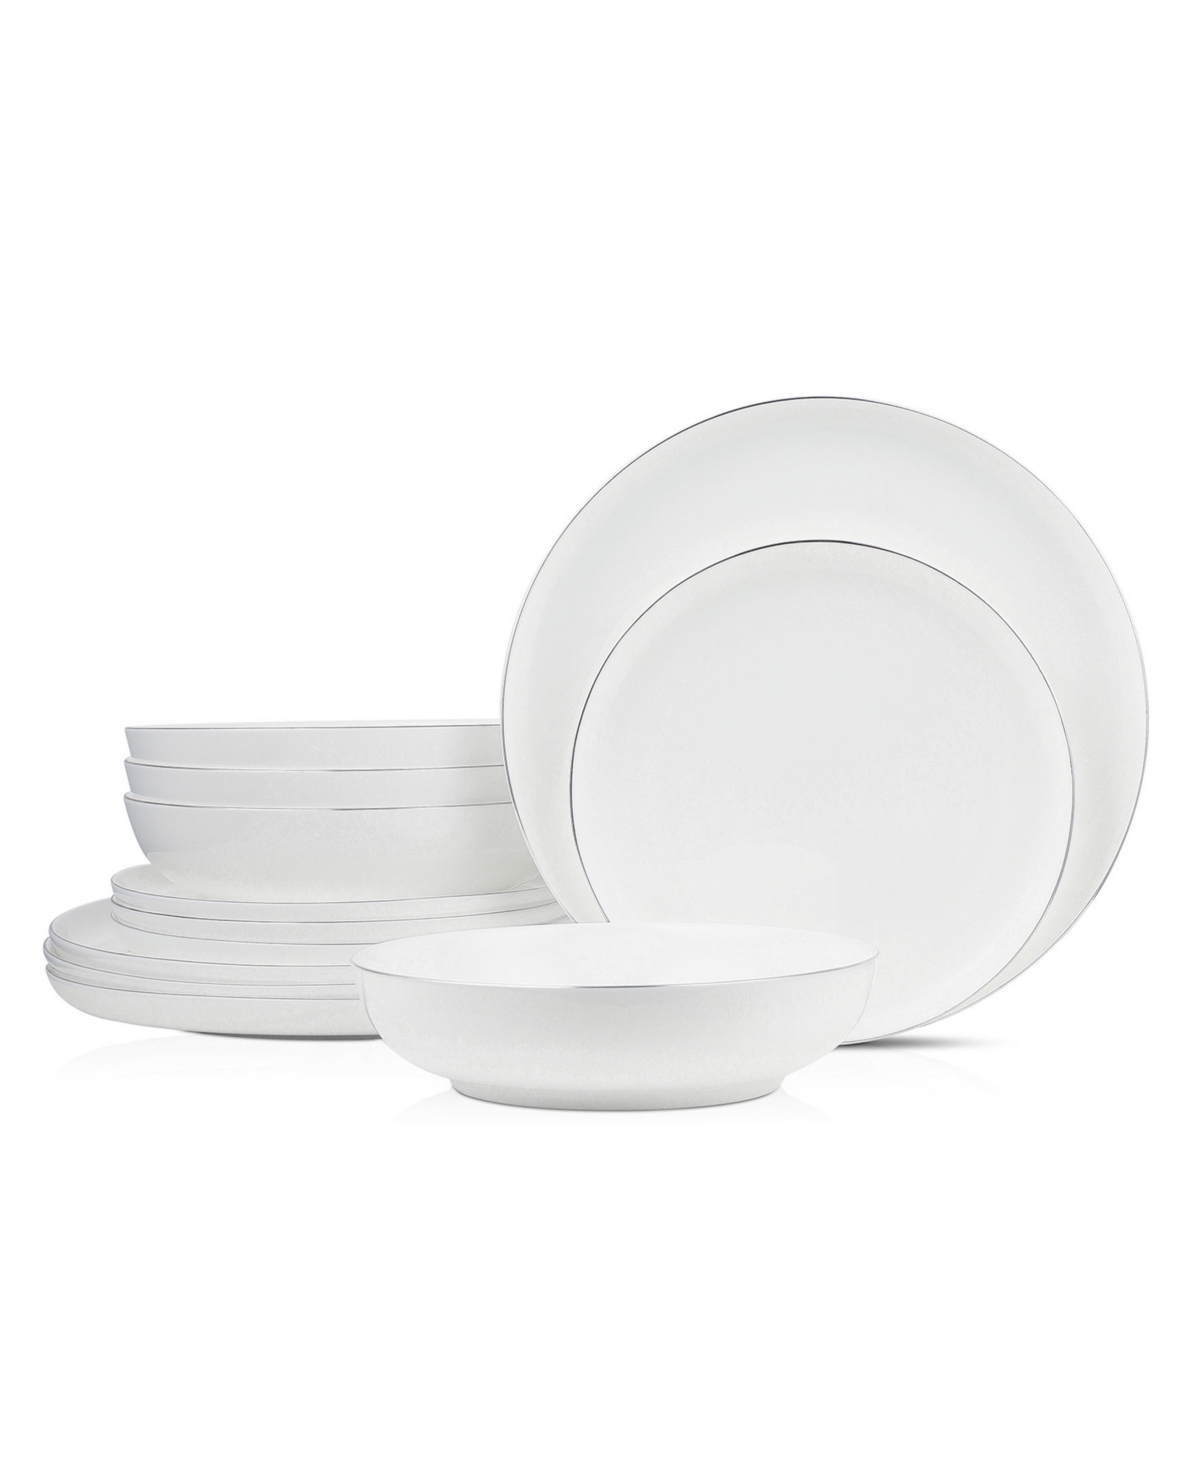 Stone Lain Gabrielle 12 Piece Dinnerware Set, Service For 4 In White And Platinum